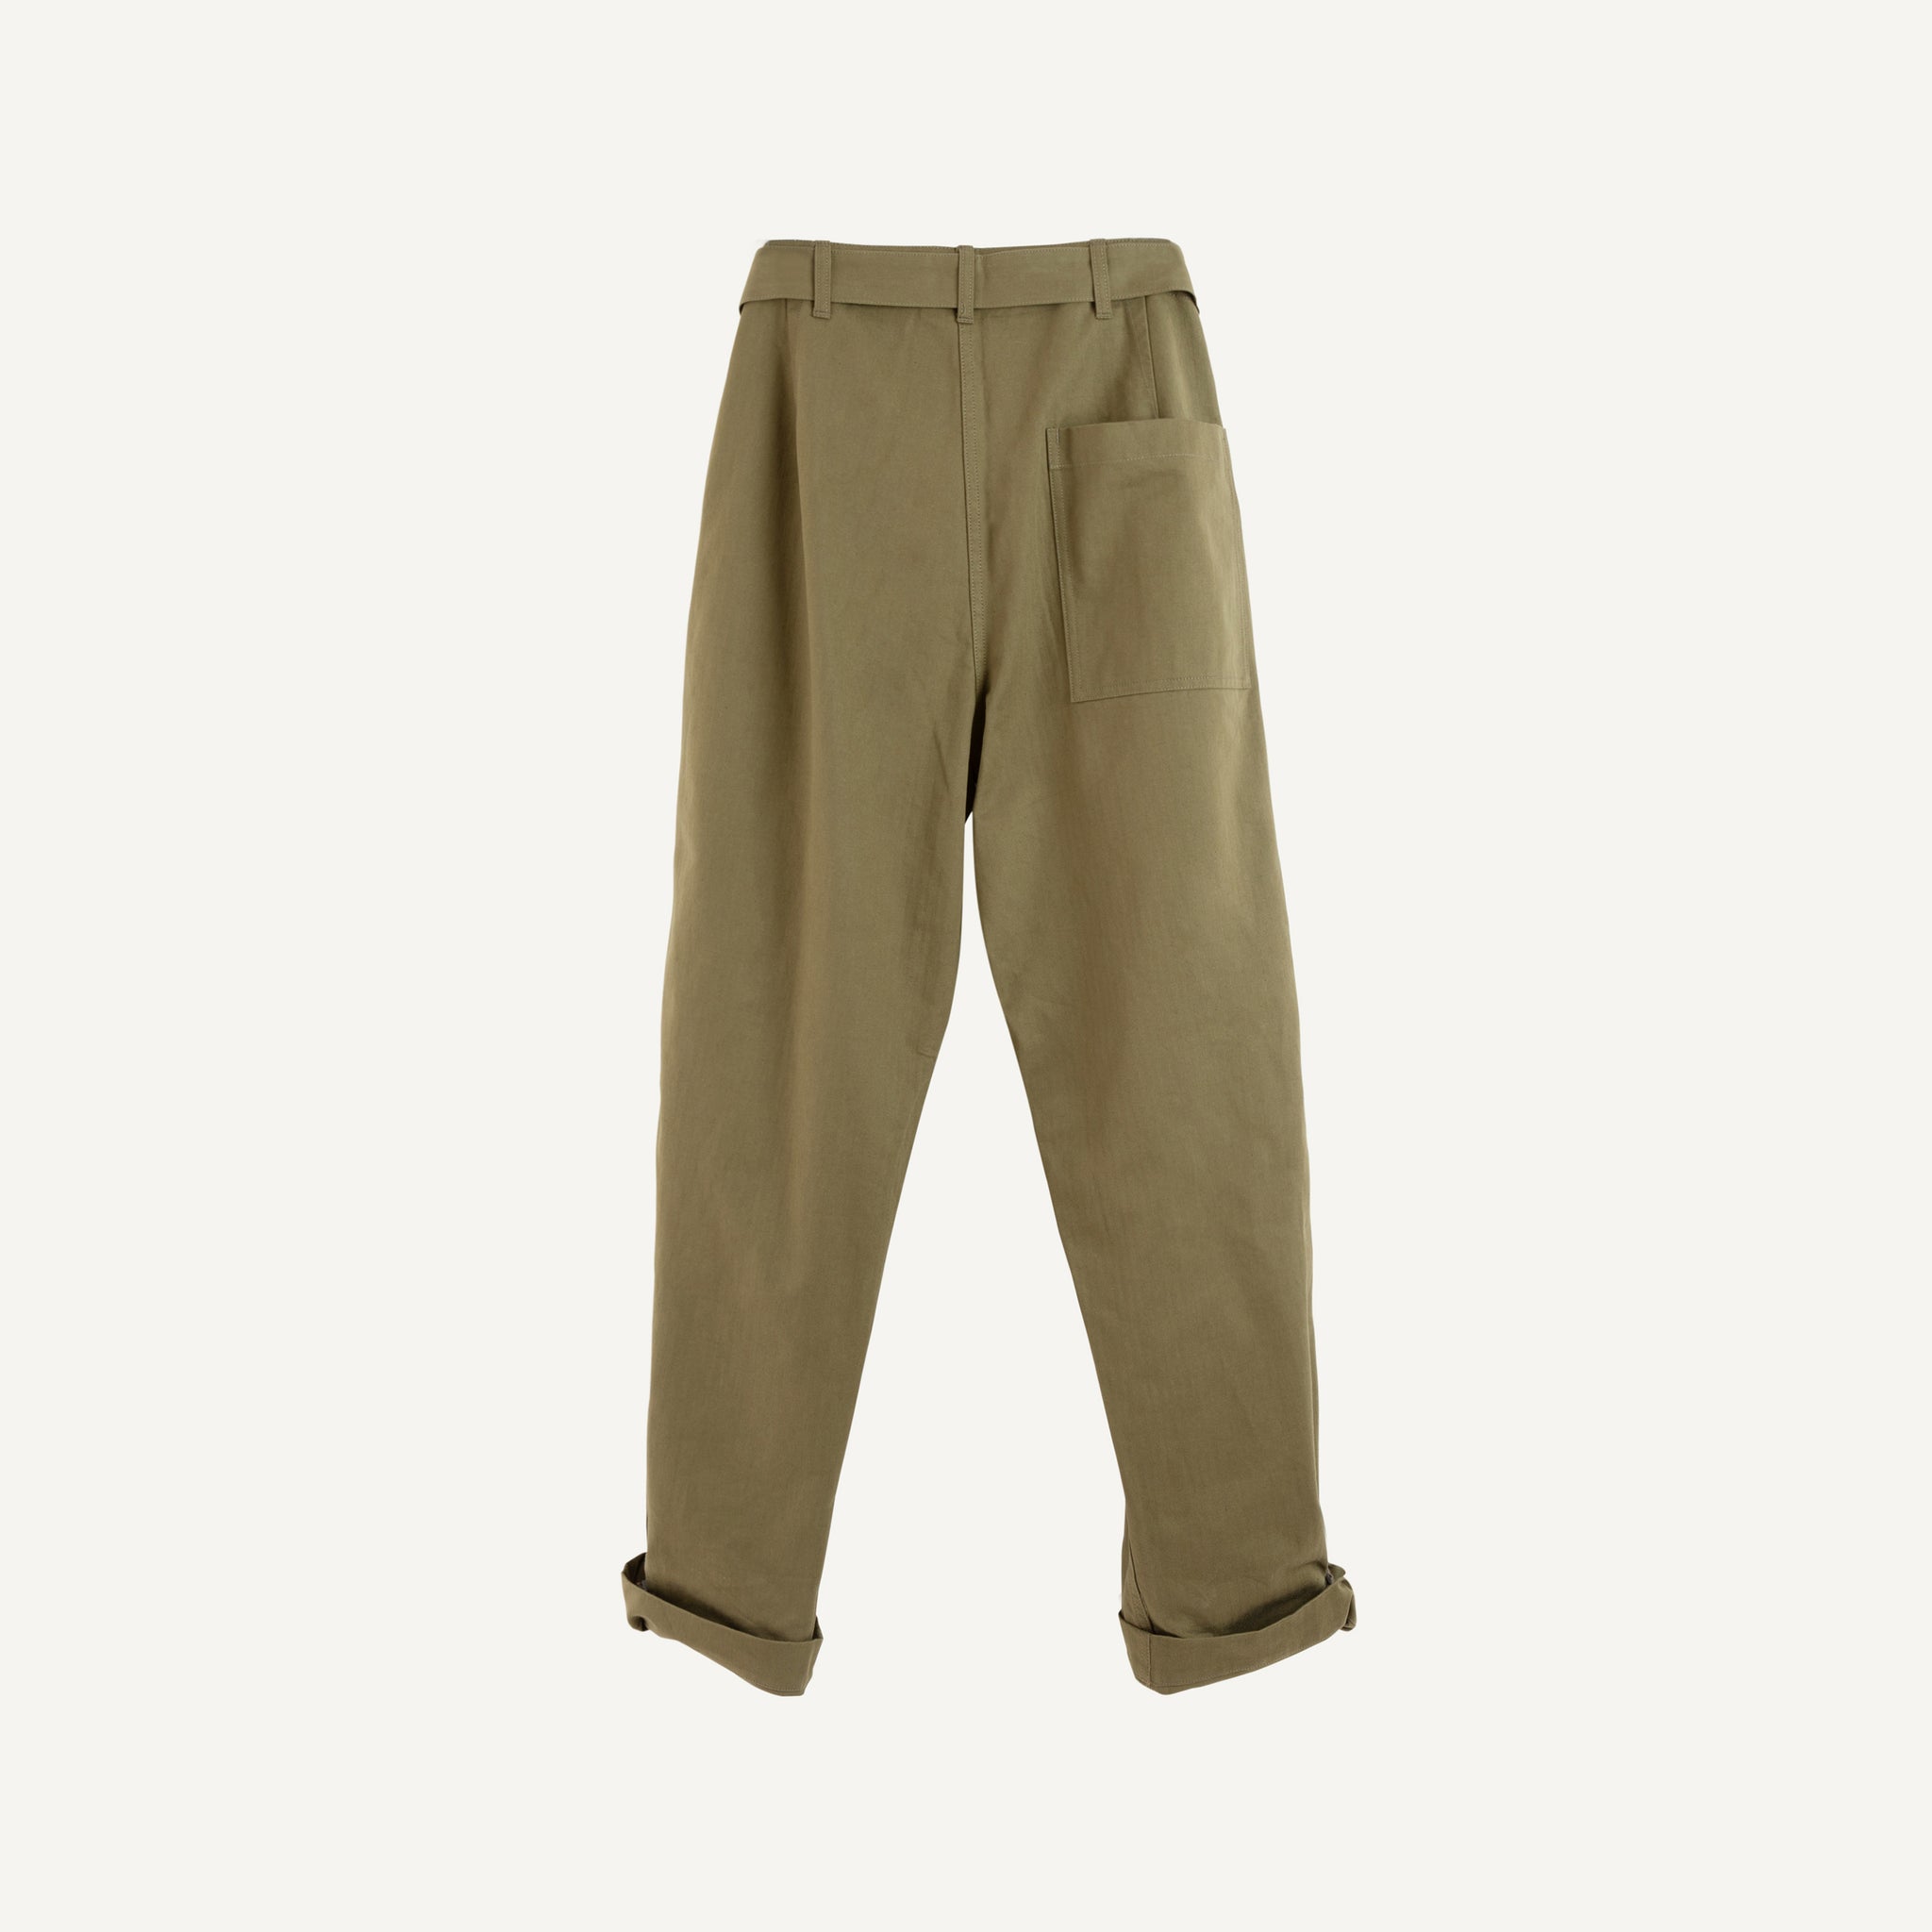 A VONTADE JEEP DRIVER TROUSERS